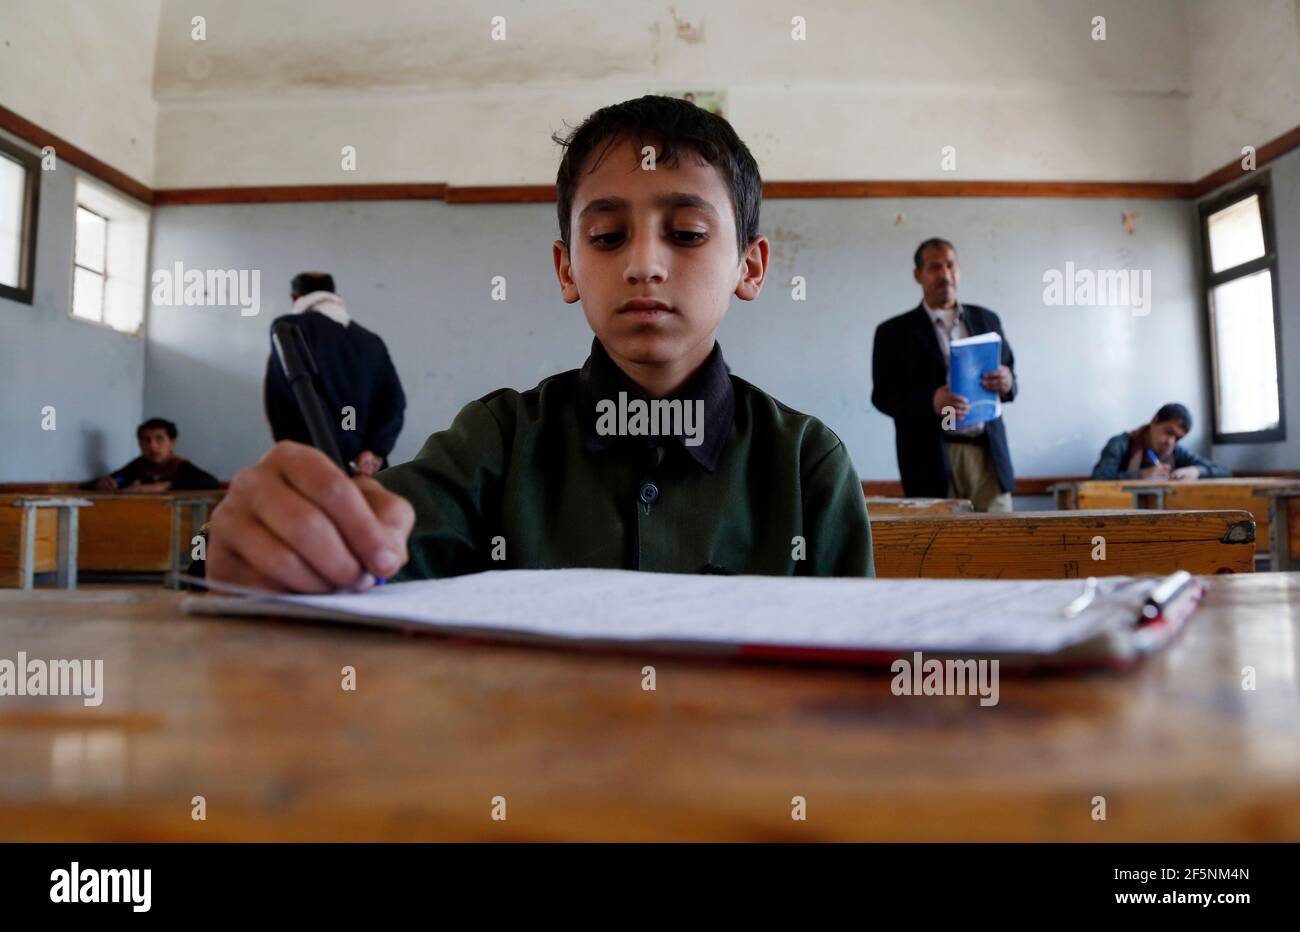 Sanaa, Yemen. 27th Mar, 2021. A child attends the final exam of the semester at a school in Sanaa, Yemen, March 27, 2021. The educational authority in Sanaa, which is controlled by the Houthi rebels, decides to end the current semester a month earlier because of the spread of COVID-19. Credit: Mohammed Mohammed/Xinhua/Alamy Live News Stock Photo